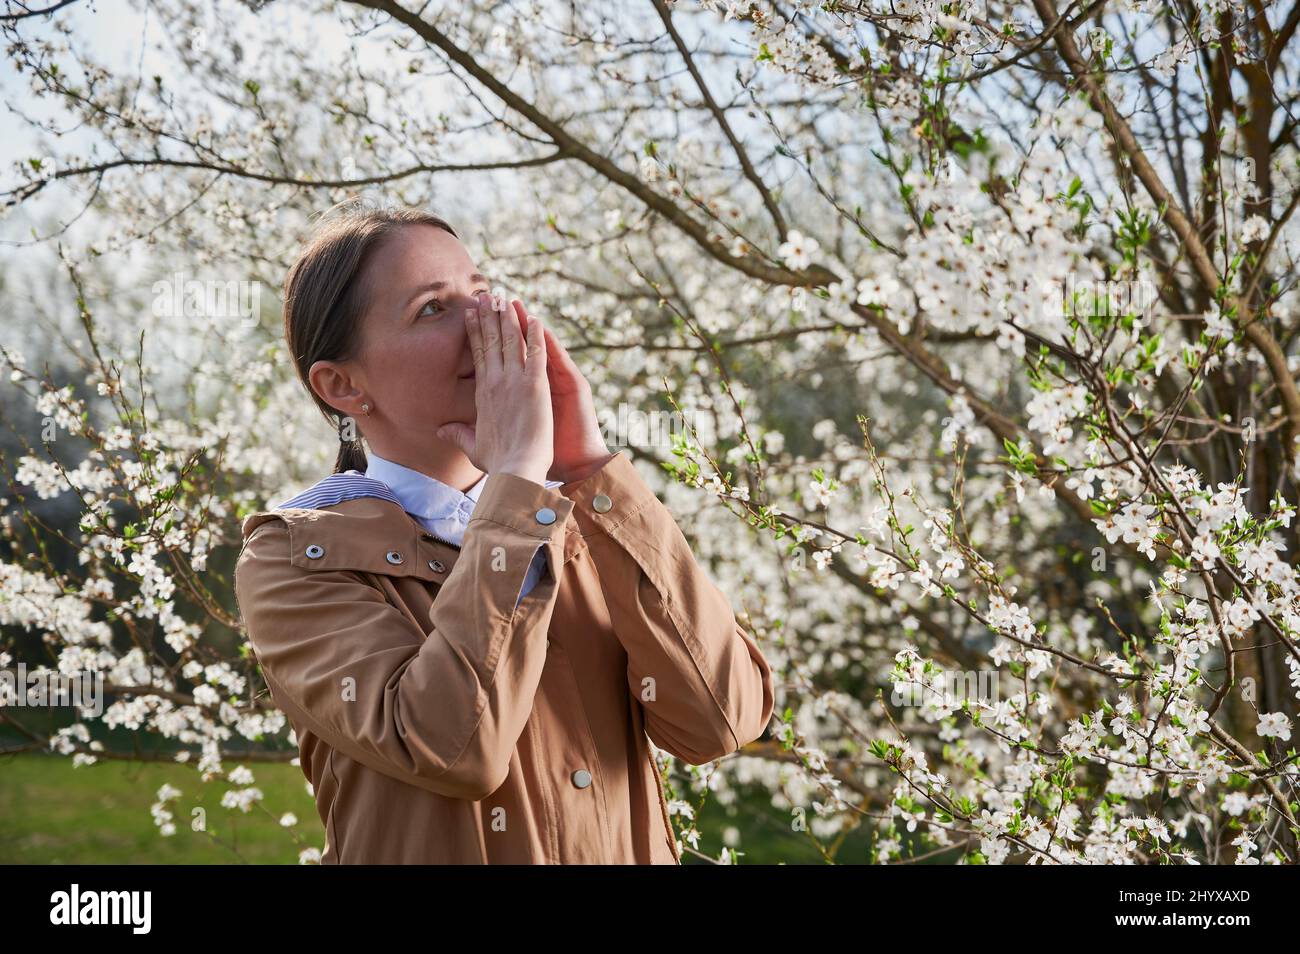 Woman allergic suffering from seasonal allergy at spring, posing in blossoming garden at springtime. Young woman sneezing in front of blooming tree. Spring allergy concept Stock Photo